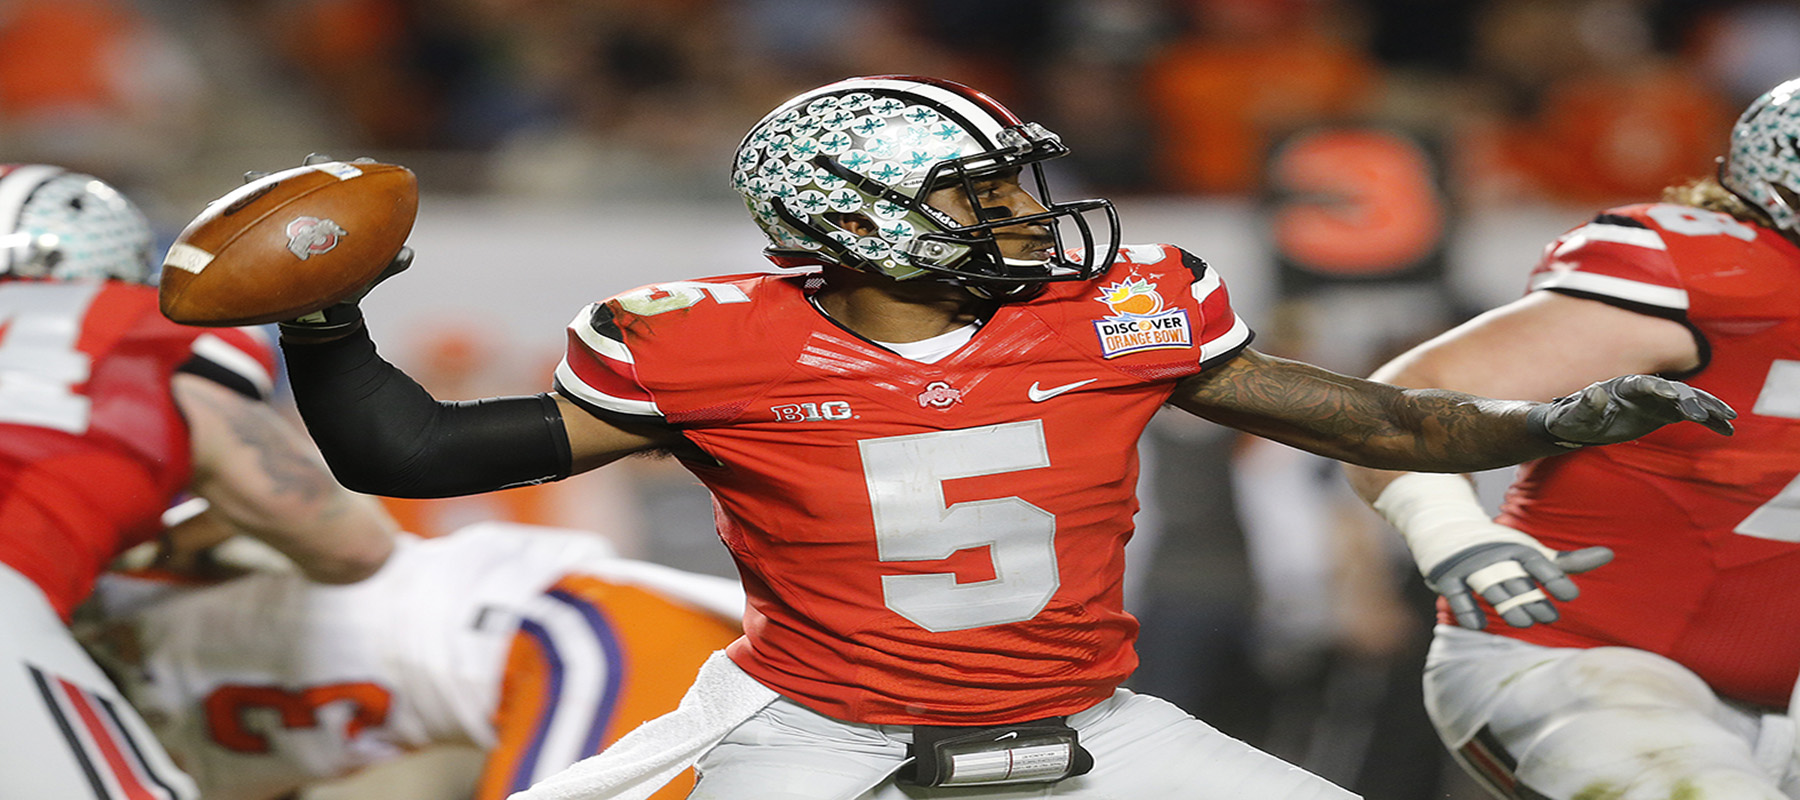 MIAMI GARDENS, FL - JANUARY 3: Braxton Miller #5 of the Ohio State Buckeyes throws the ball against the Clemson Tigers during the 2014 Discover Orange Bowl at Sun Life Stadium on January 3, 2014 in Miami, (Photo by Joel Auerbach/Getty Images) *** Local Caption *** Braxton Miller